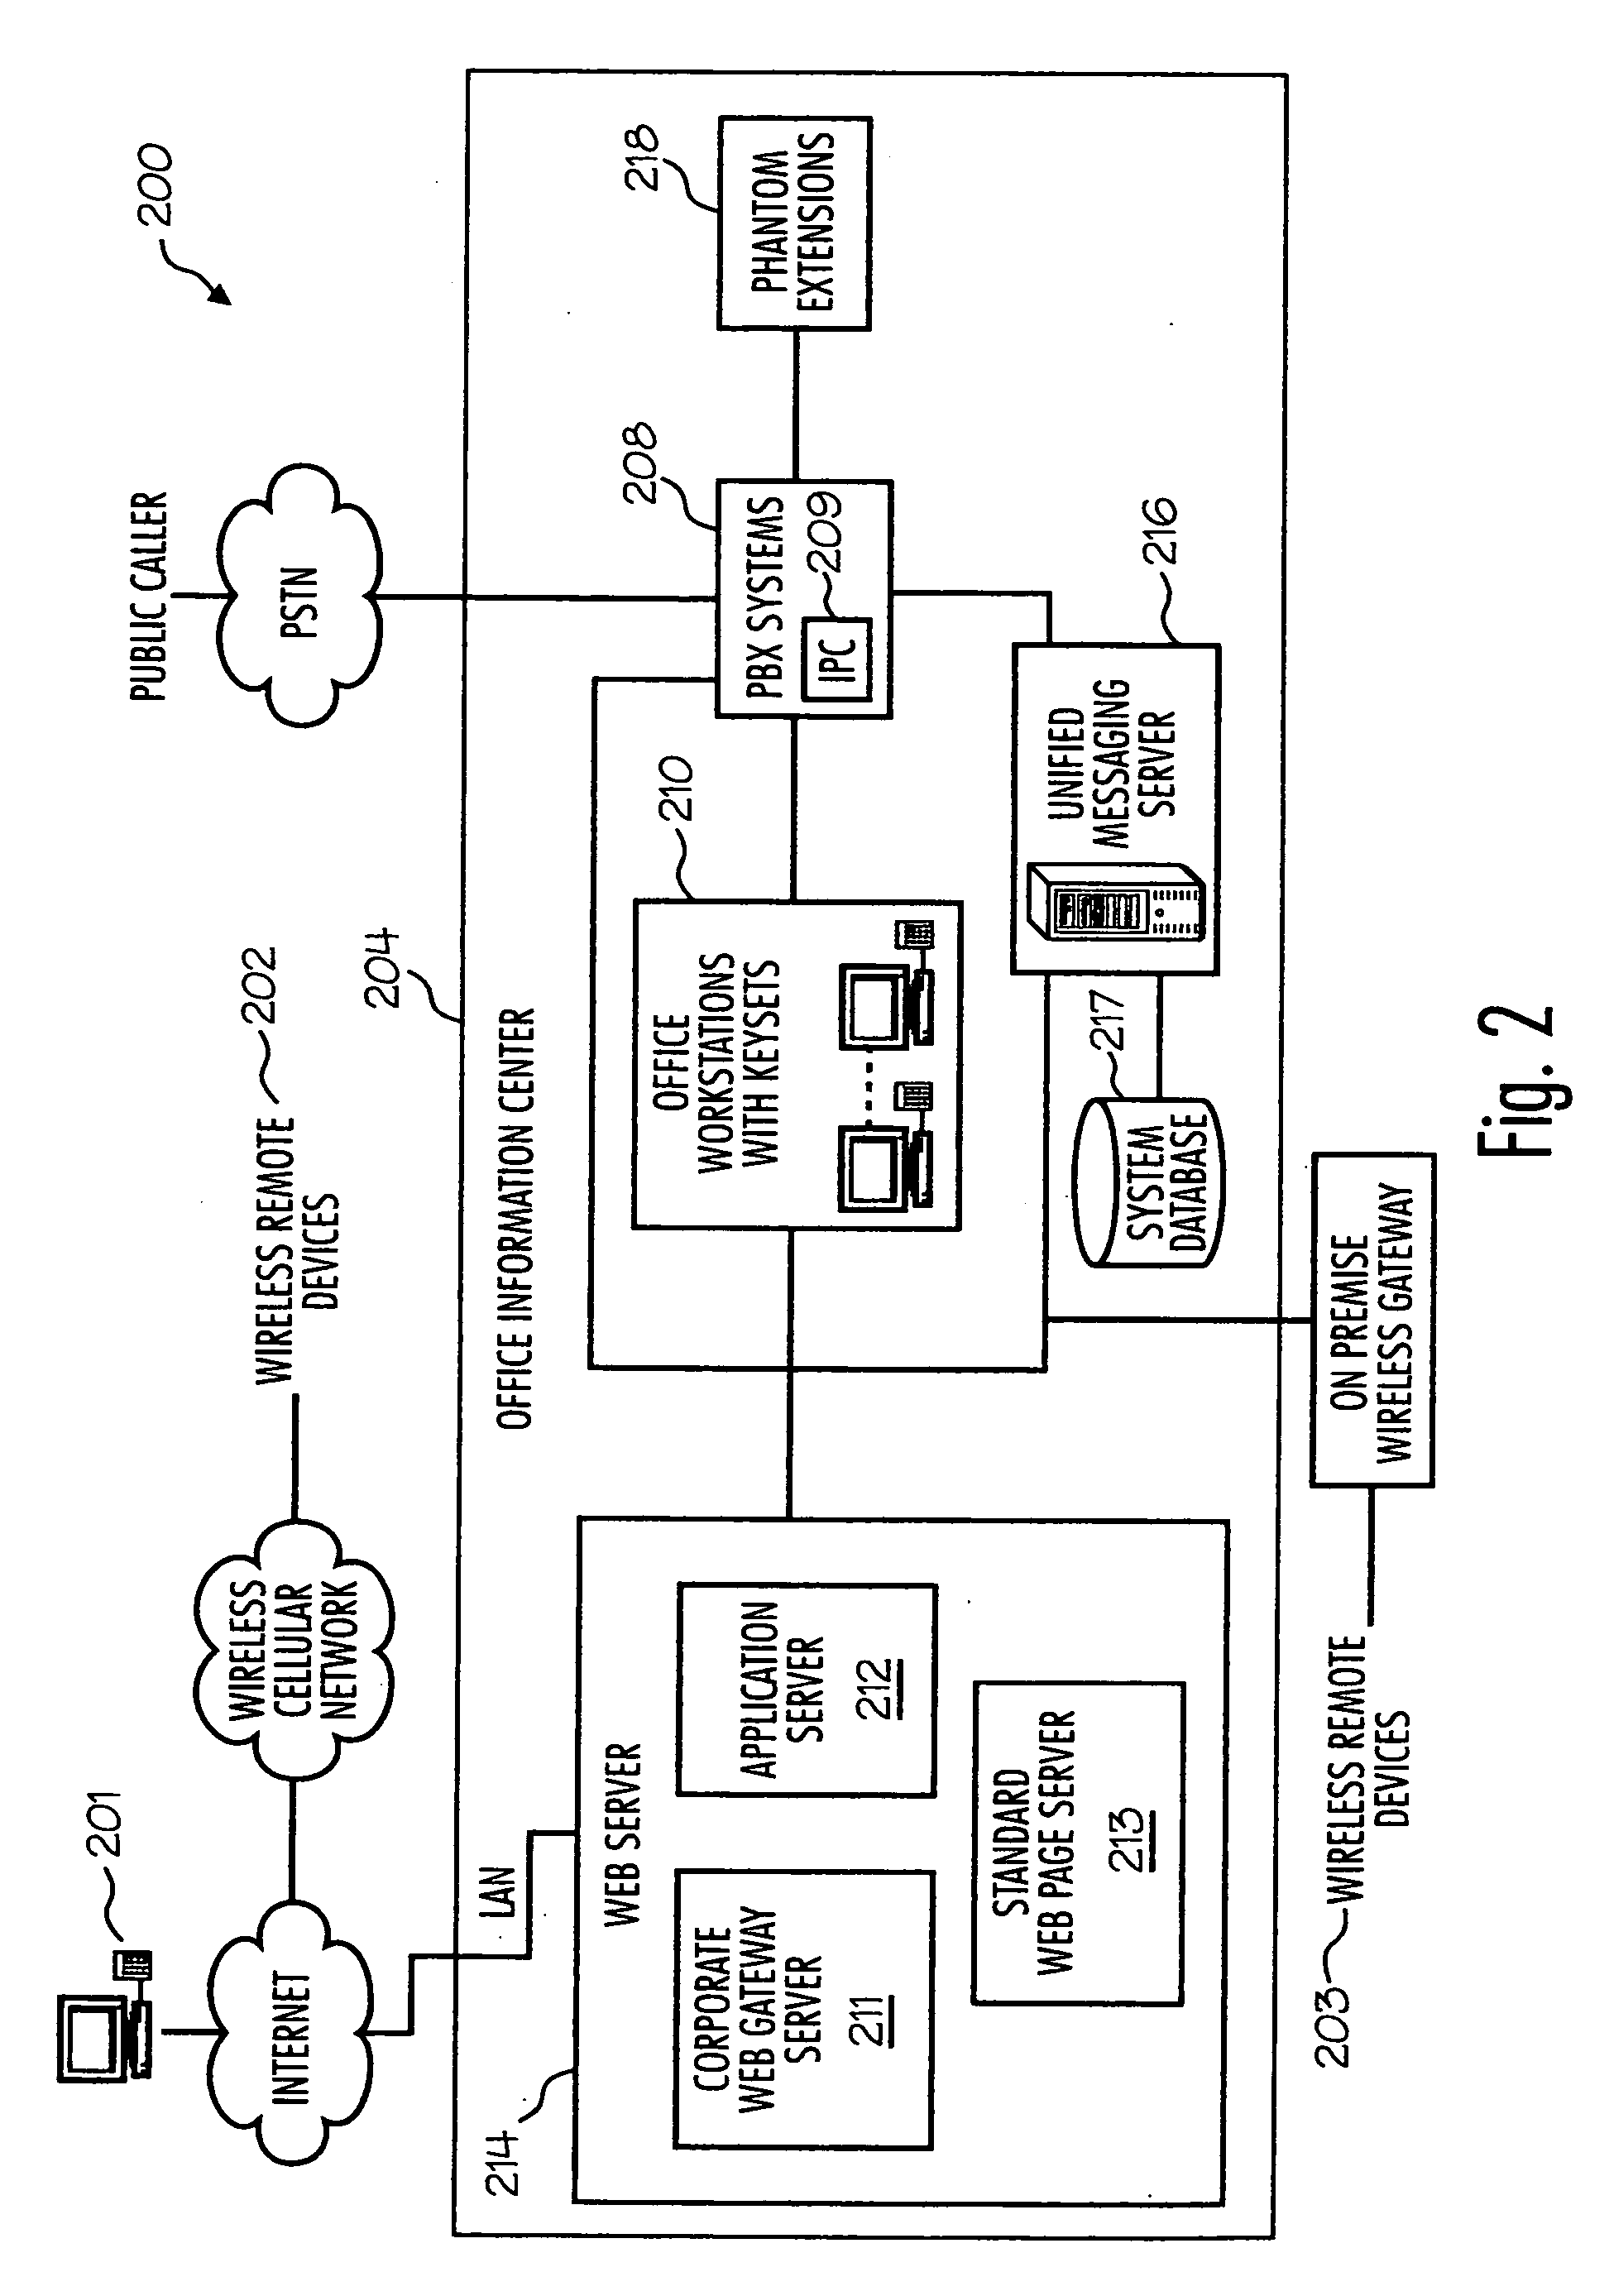 System and method for remote access to a telephone